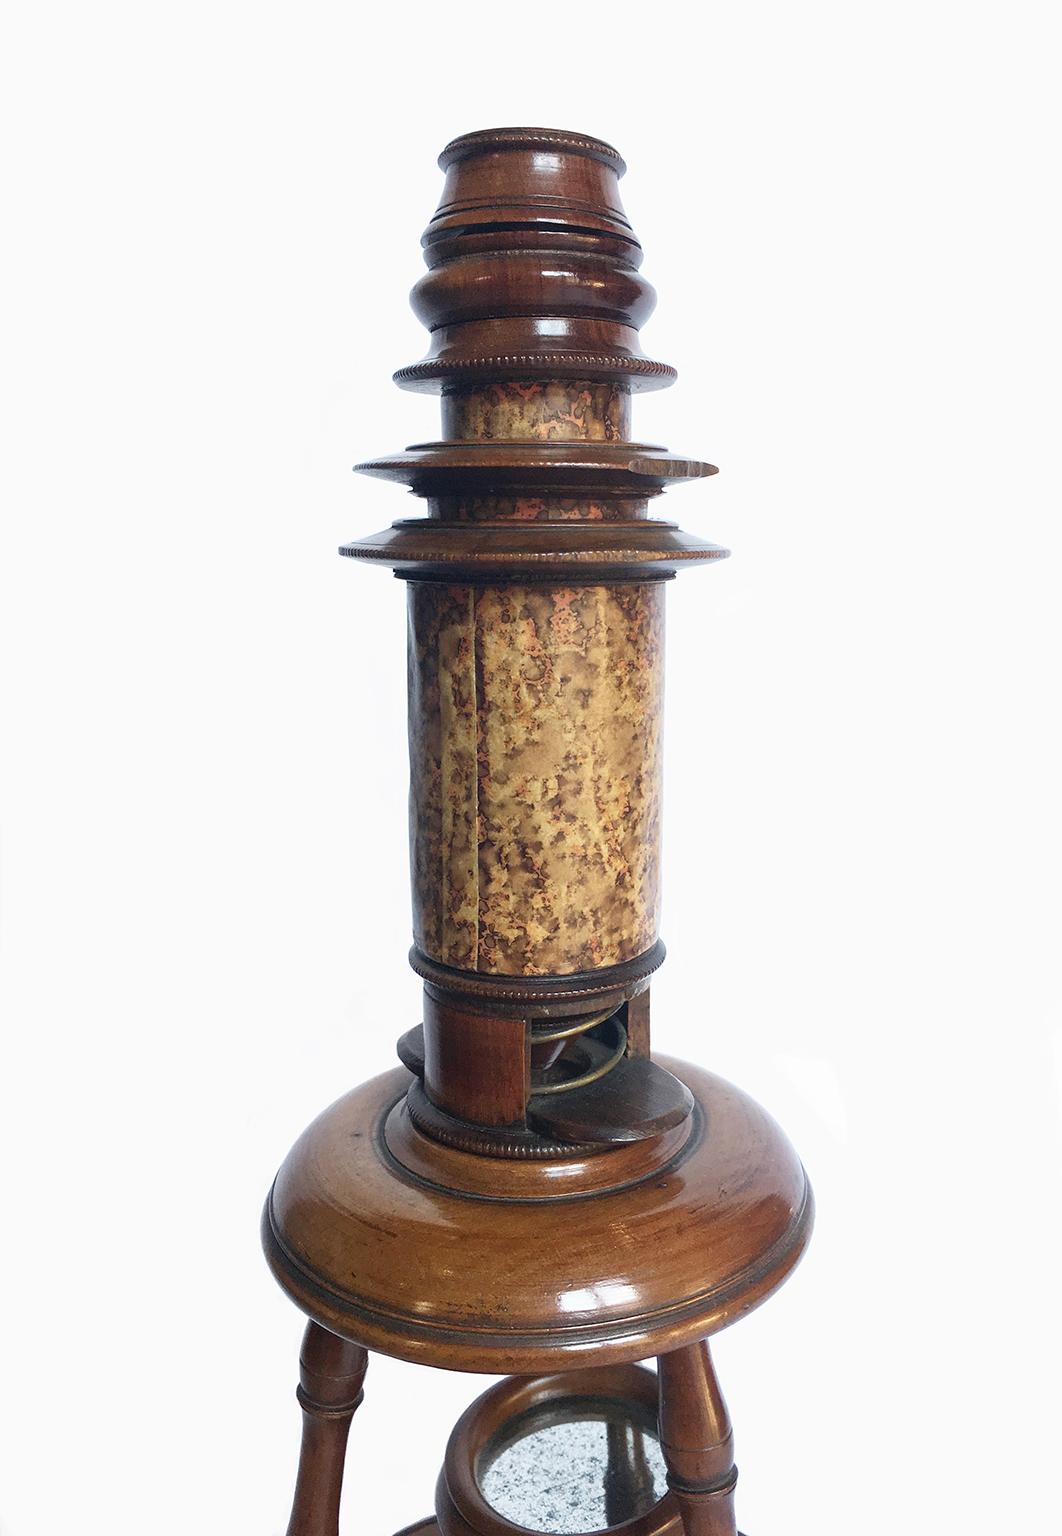 Microscope
Wood, cardboard and colored paper
Nuremberg, early 19th century
It measures 12.2 in high x 4.8 in diameter
(31 cm high x 12.2 cm diameter)
It weighs 0.71 lb (325 g)
State of conservation: one of the wooden ferrules has a chipped